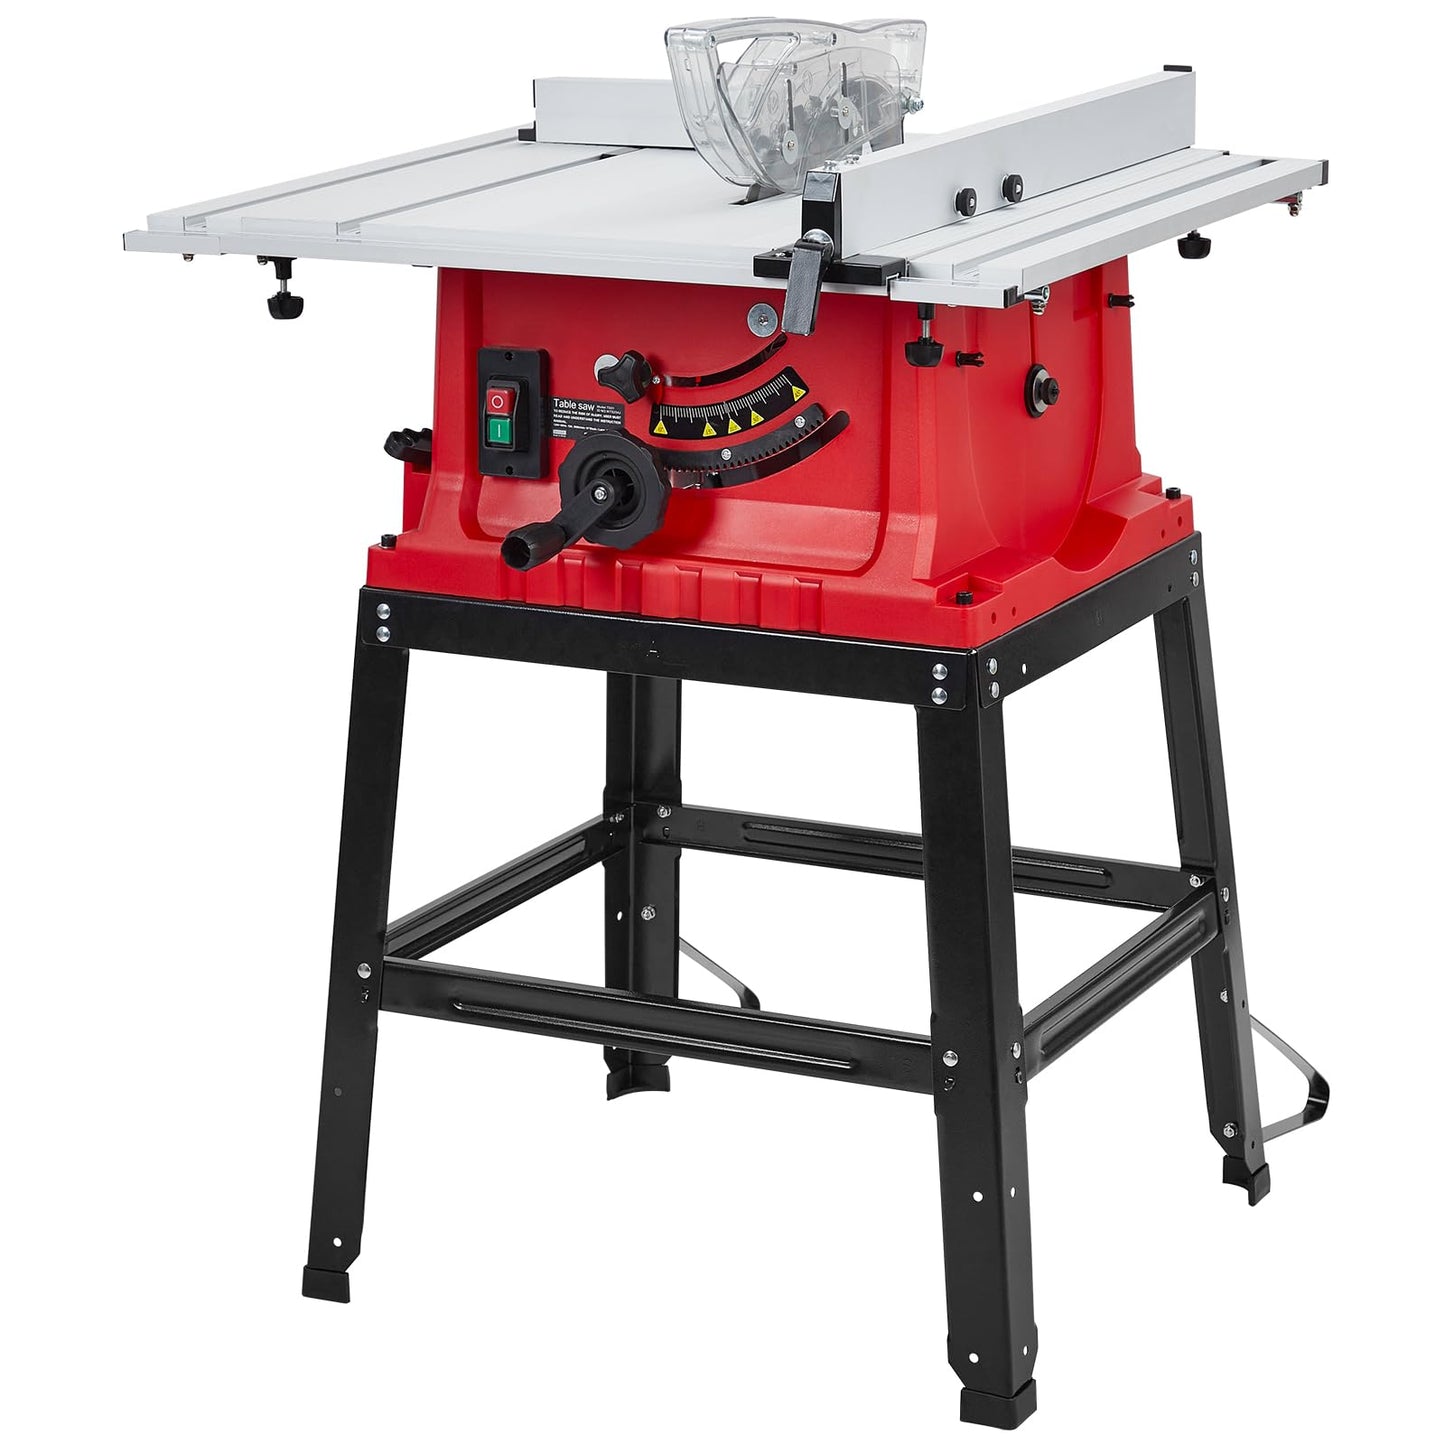 Table Saw, Broadfashion 10 Inch 15A Multifunctional Saw with Stand & Push Stick, 90° Cross Cut & 0-45° Bevel Cut, 5000RPM, Adjustable Blade Height